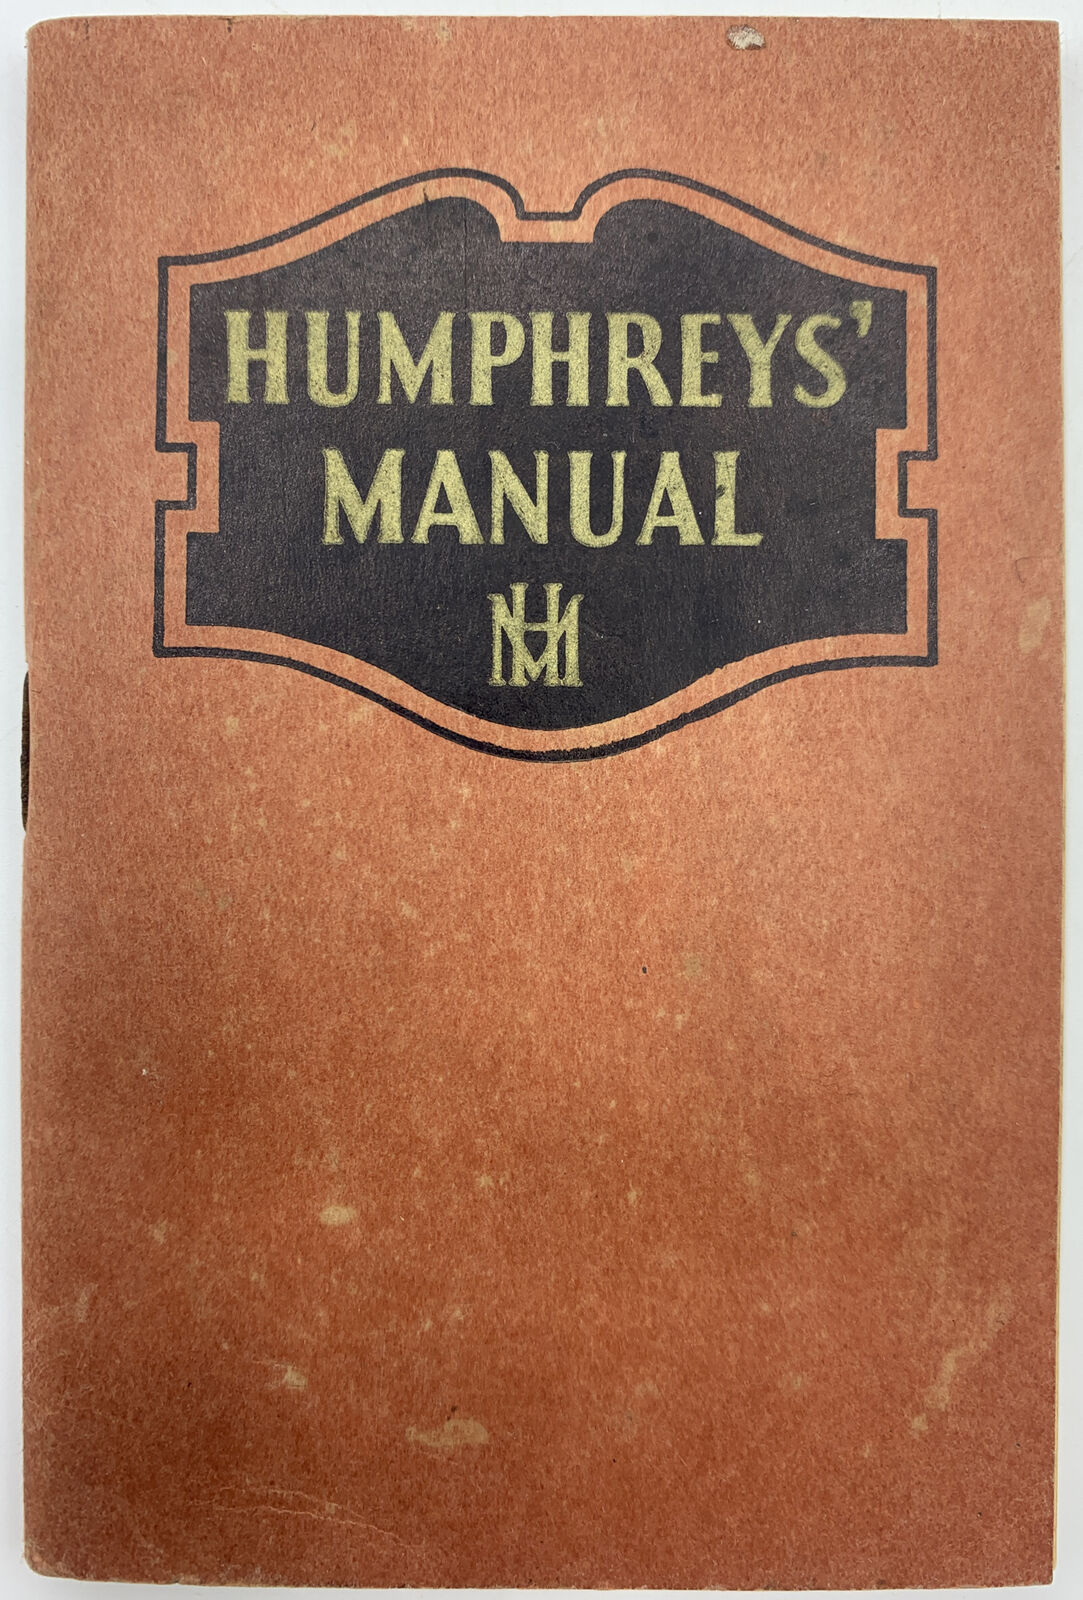 Humphreys Manual Medicine Company 1943 Homeopathic Remedies Booklet